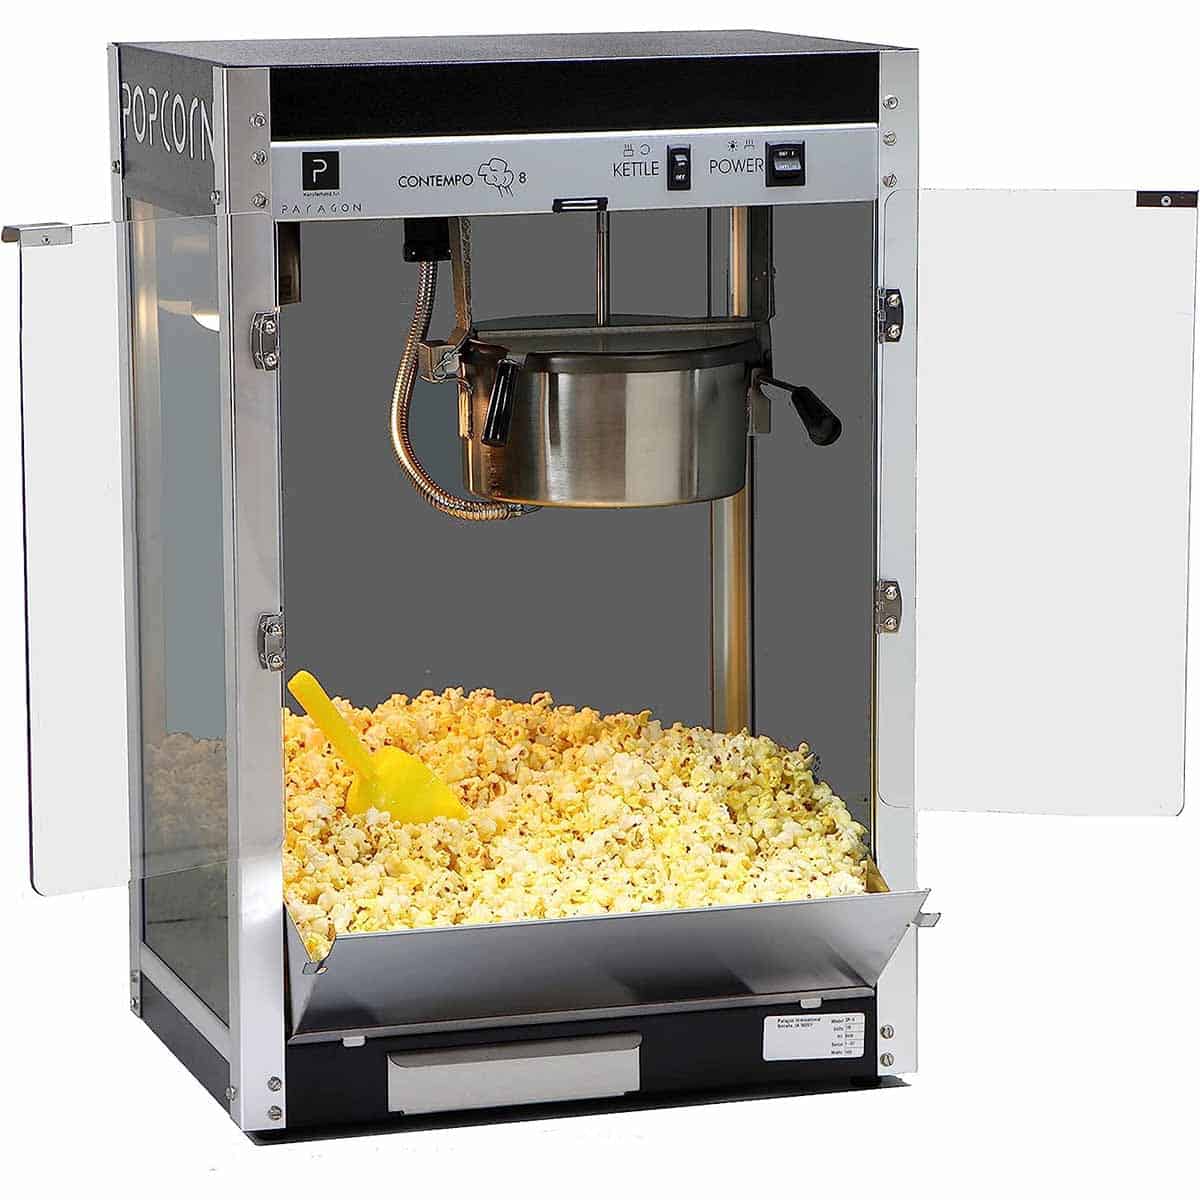 Paragon Contempo Pop 8 Ounce Popcorn Machine for Professional Concessionaires Requiring Commercial Quality High Output Popcorn Equipment, Black and Chrome Review